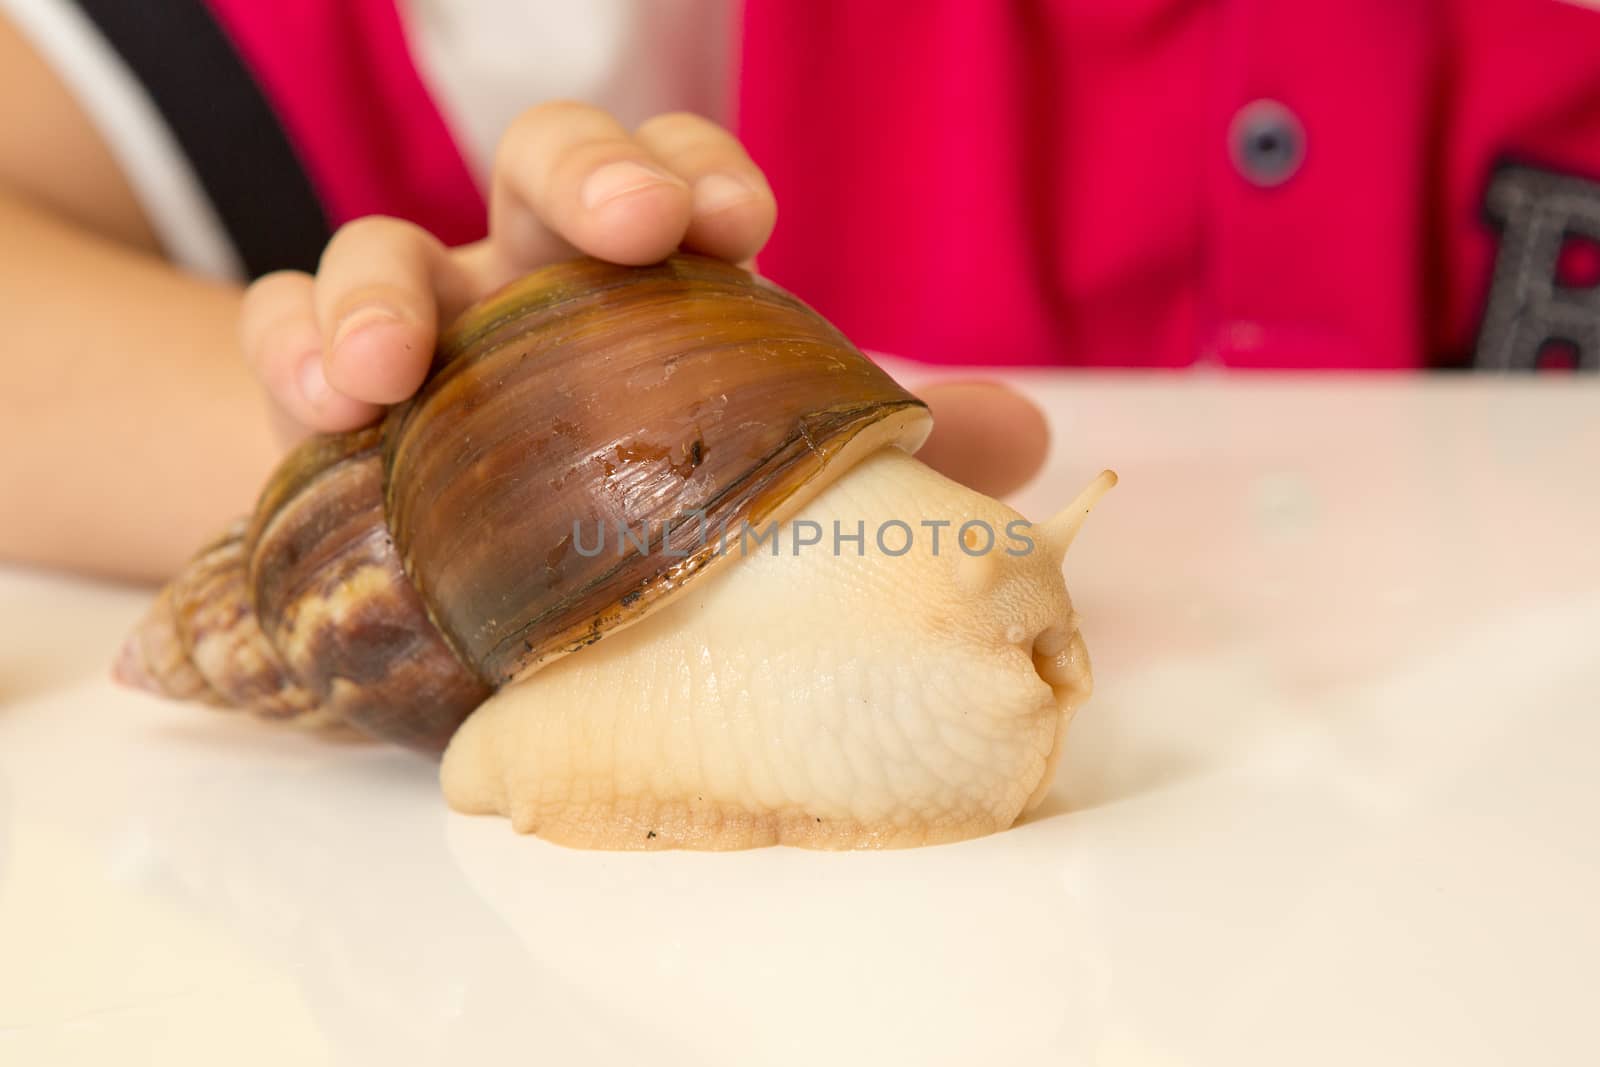 African Achatina snail in hand at home, close up by olgagordeeva